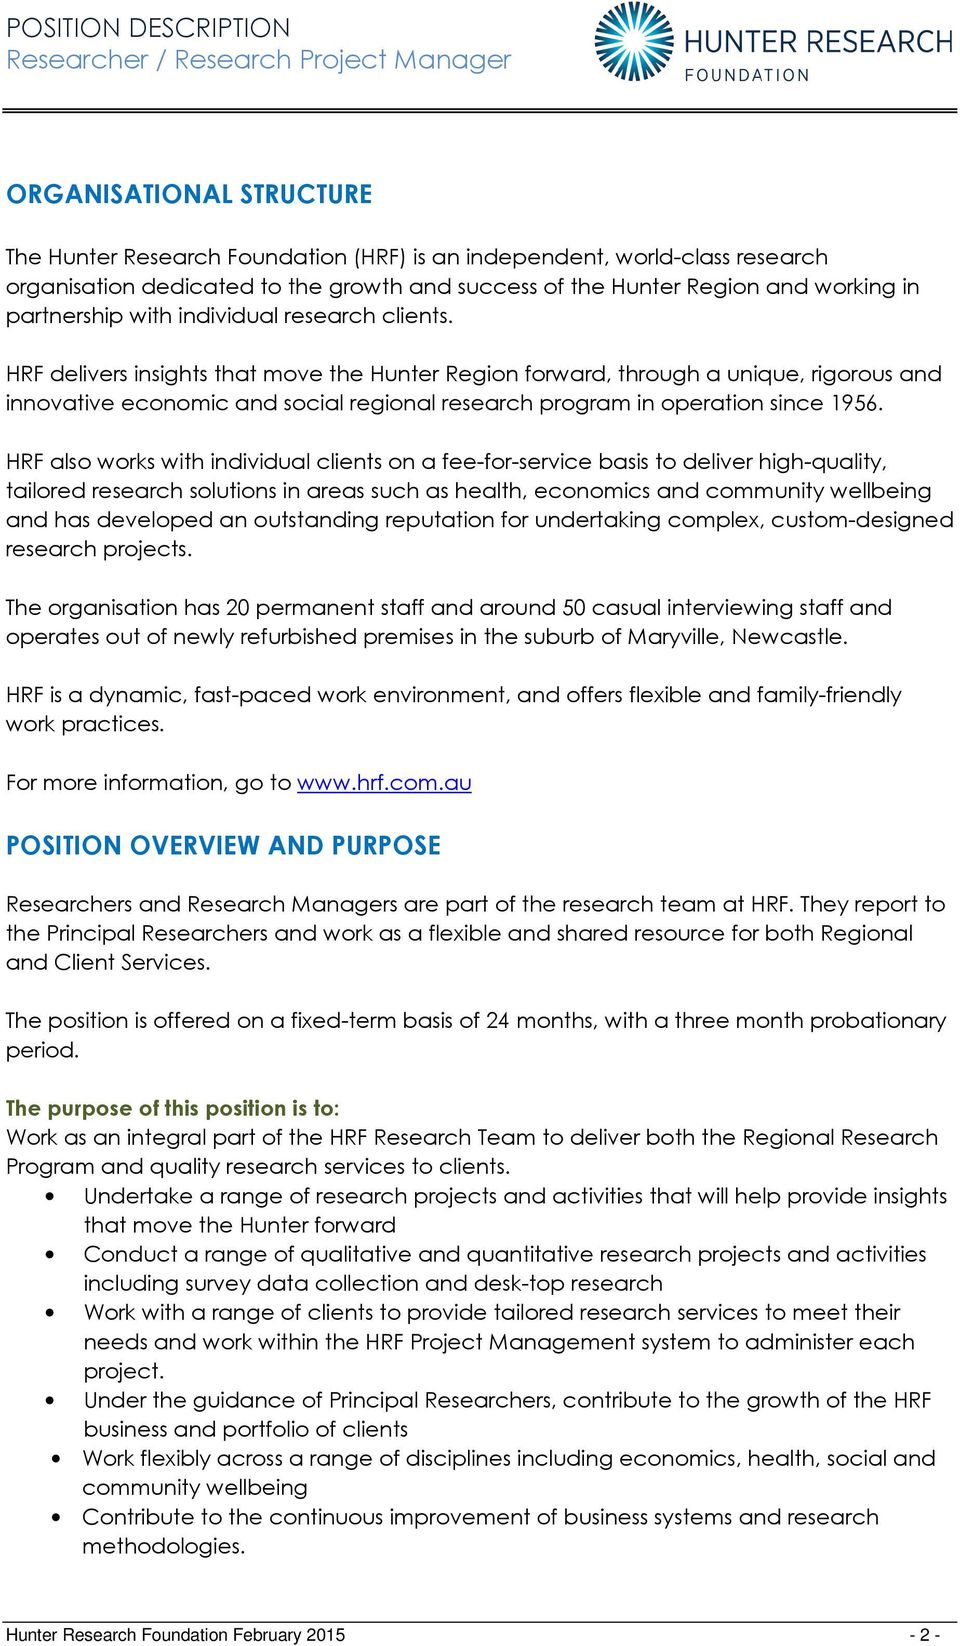 HRF delivers insights that move the Hunter Region forward, through a unique, rigorous and innovative economic and social regional research program in operation since 1956.